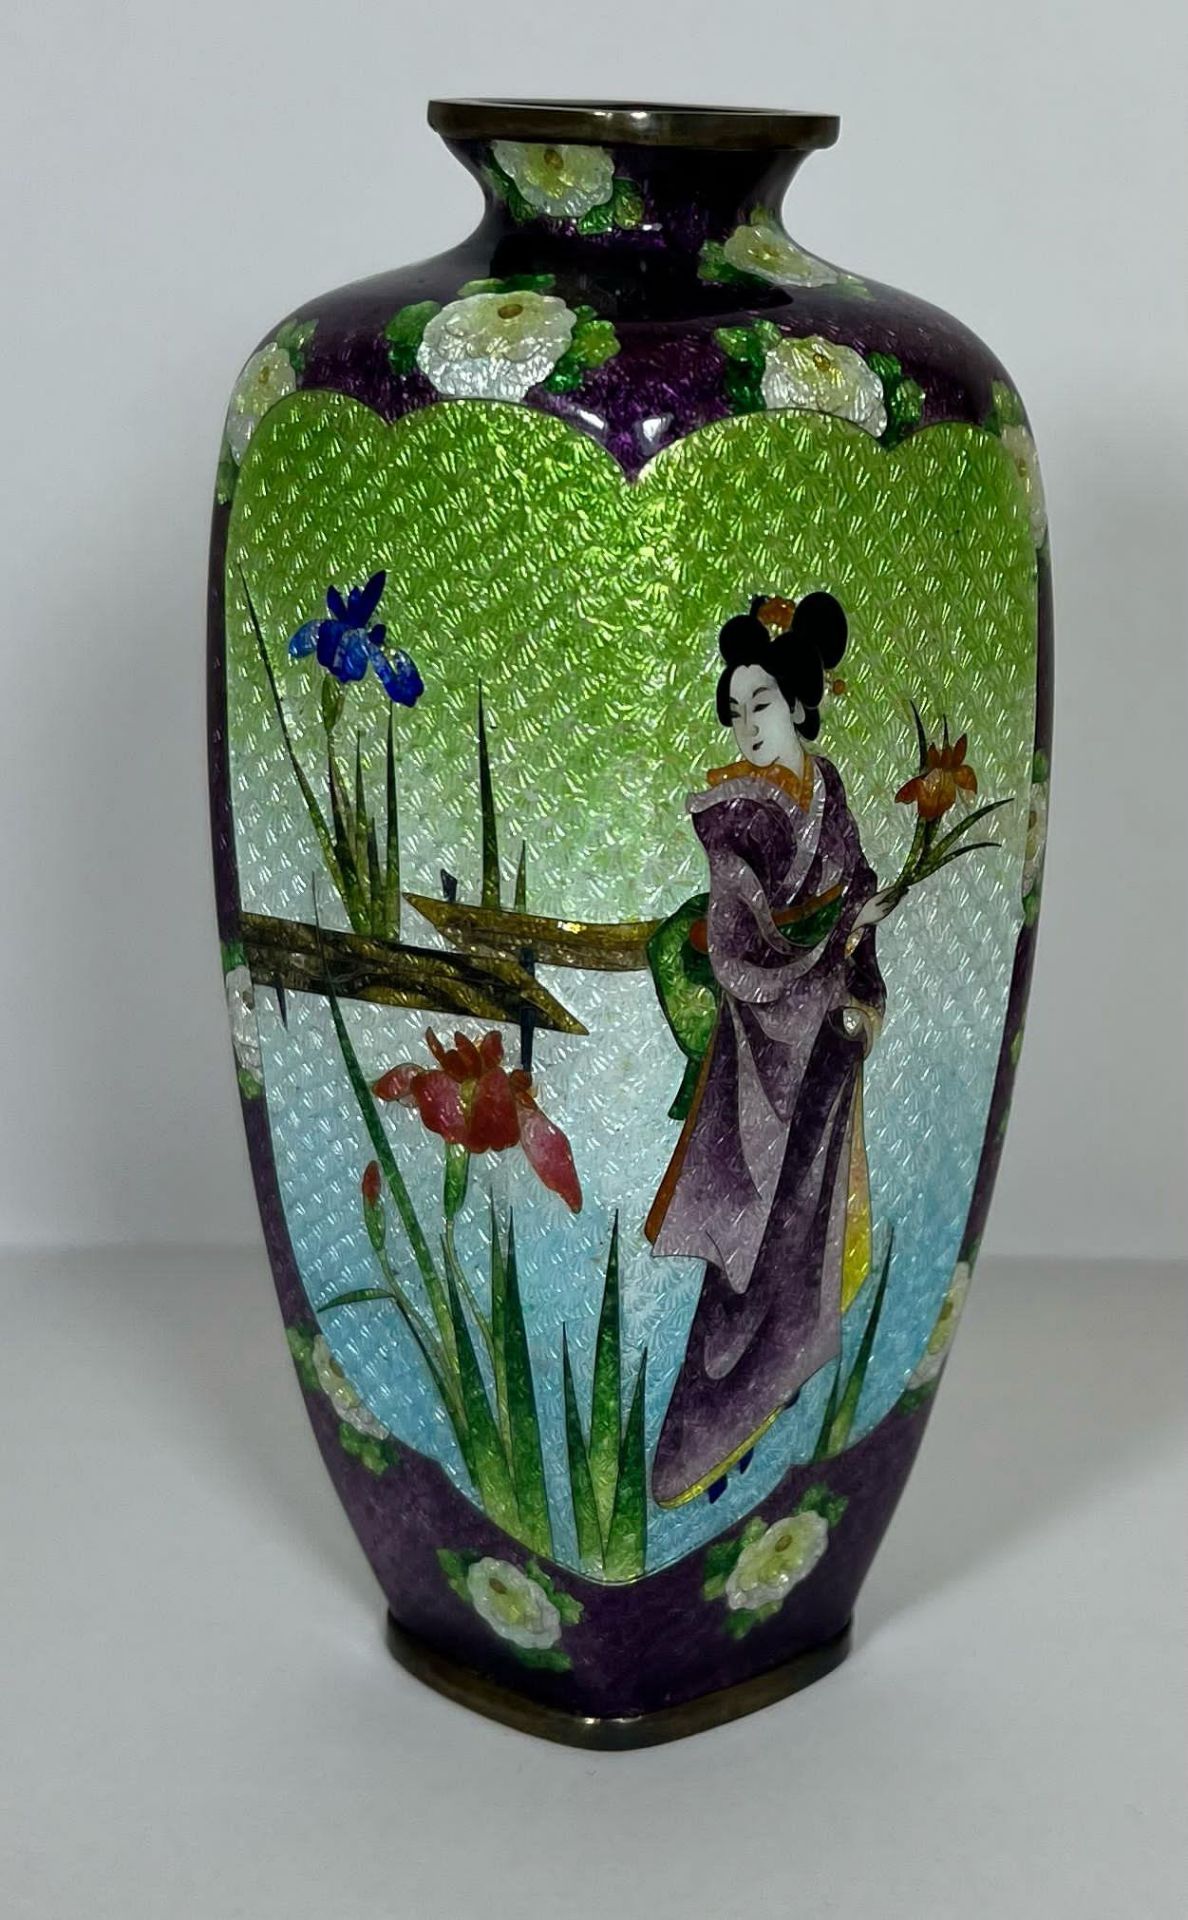 A JAPANESE GINBARI MEIJI PERIOD (1868-1912) ENAMEL DESIGN VASE DECORATED WITH A GEISHA GIRL BY A - Image 3 of 4